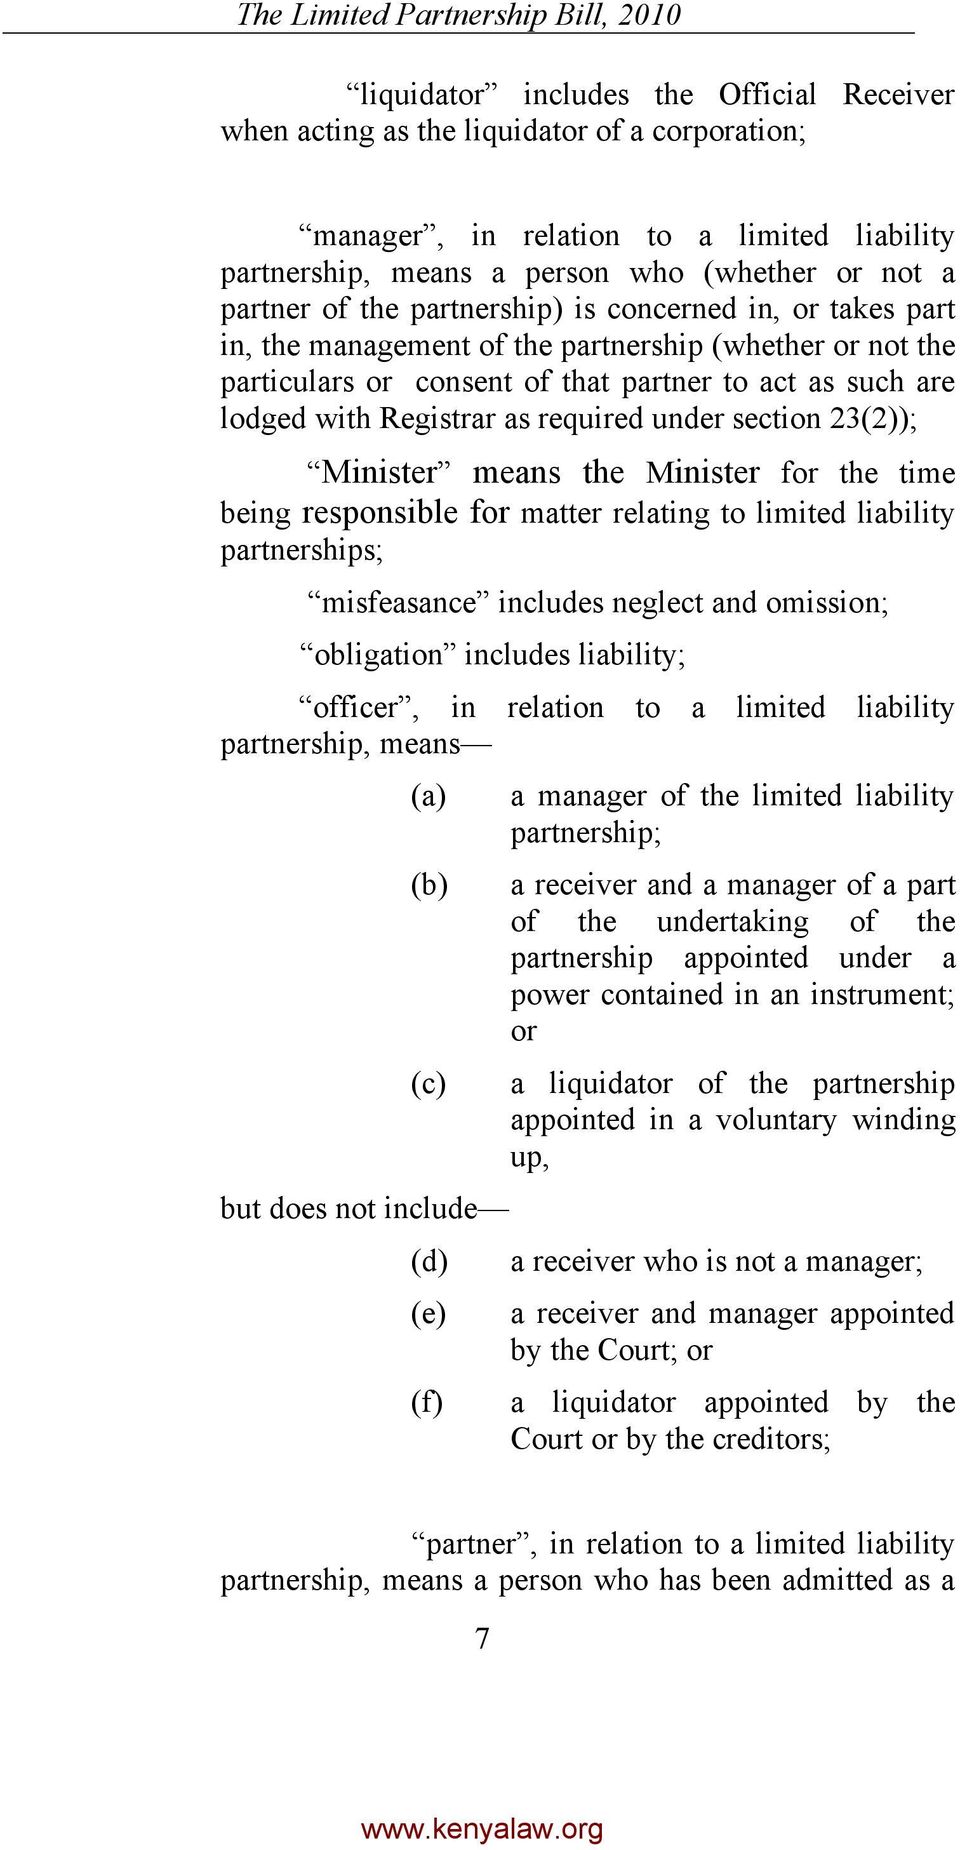 section 23(2)); Minister means the Minister for the time being responsible for matter relating to limited liability partnerships; misfeasance includes neglect and omission; obligation includes